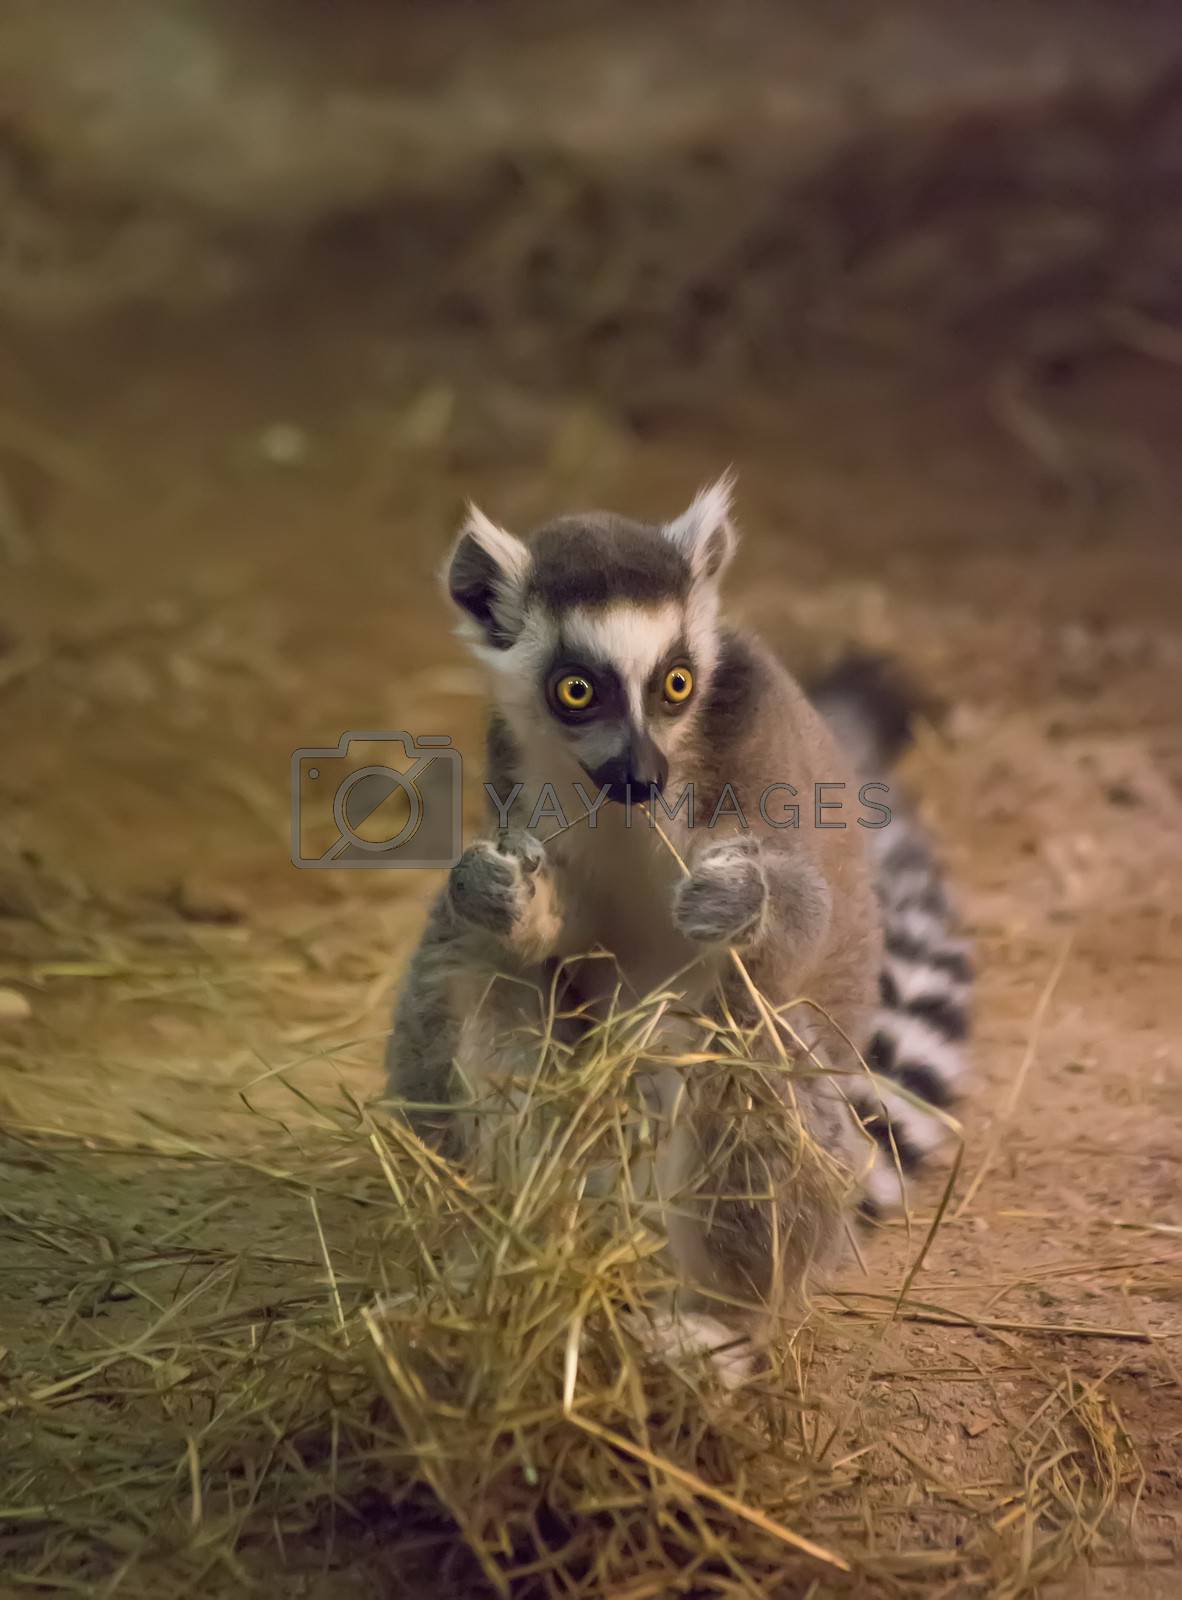 Royalty free image of Lemur funny animal by desant7474